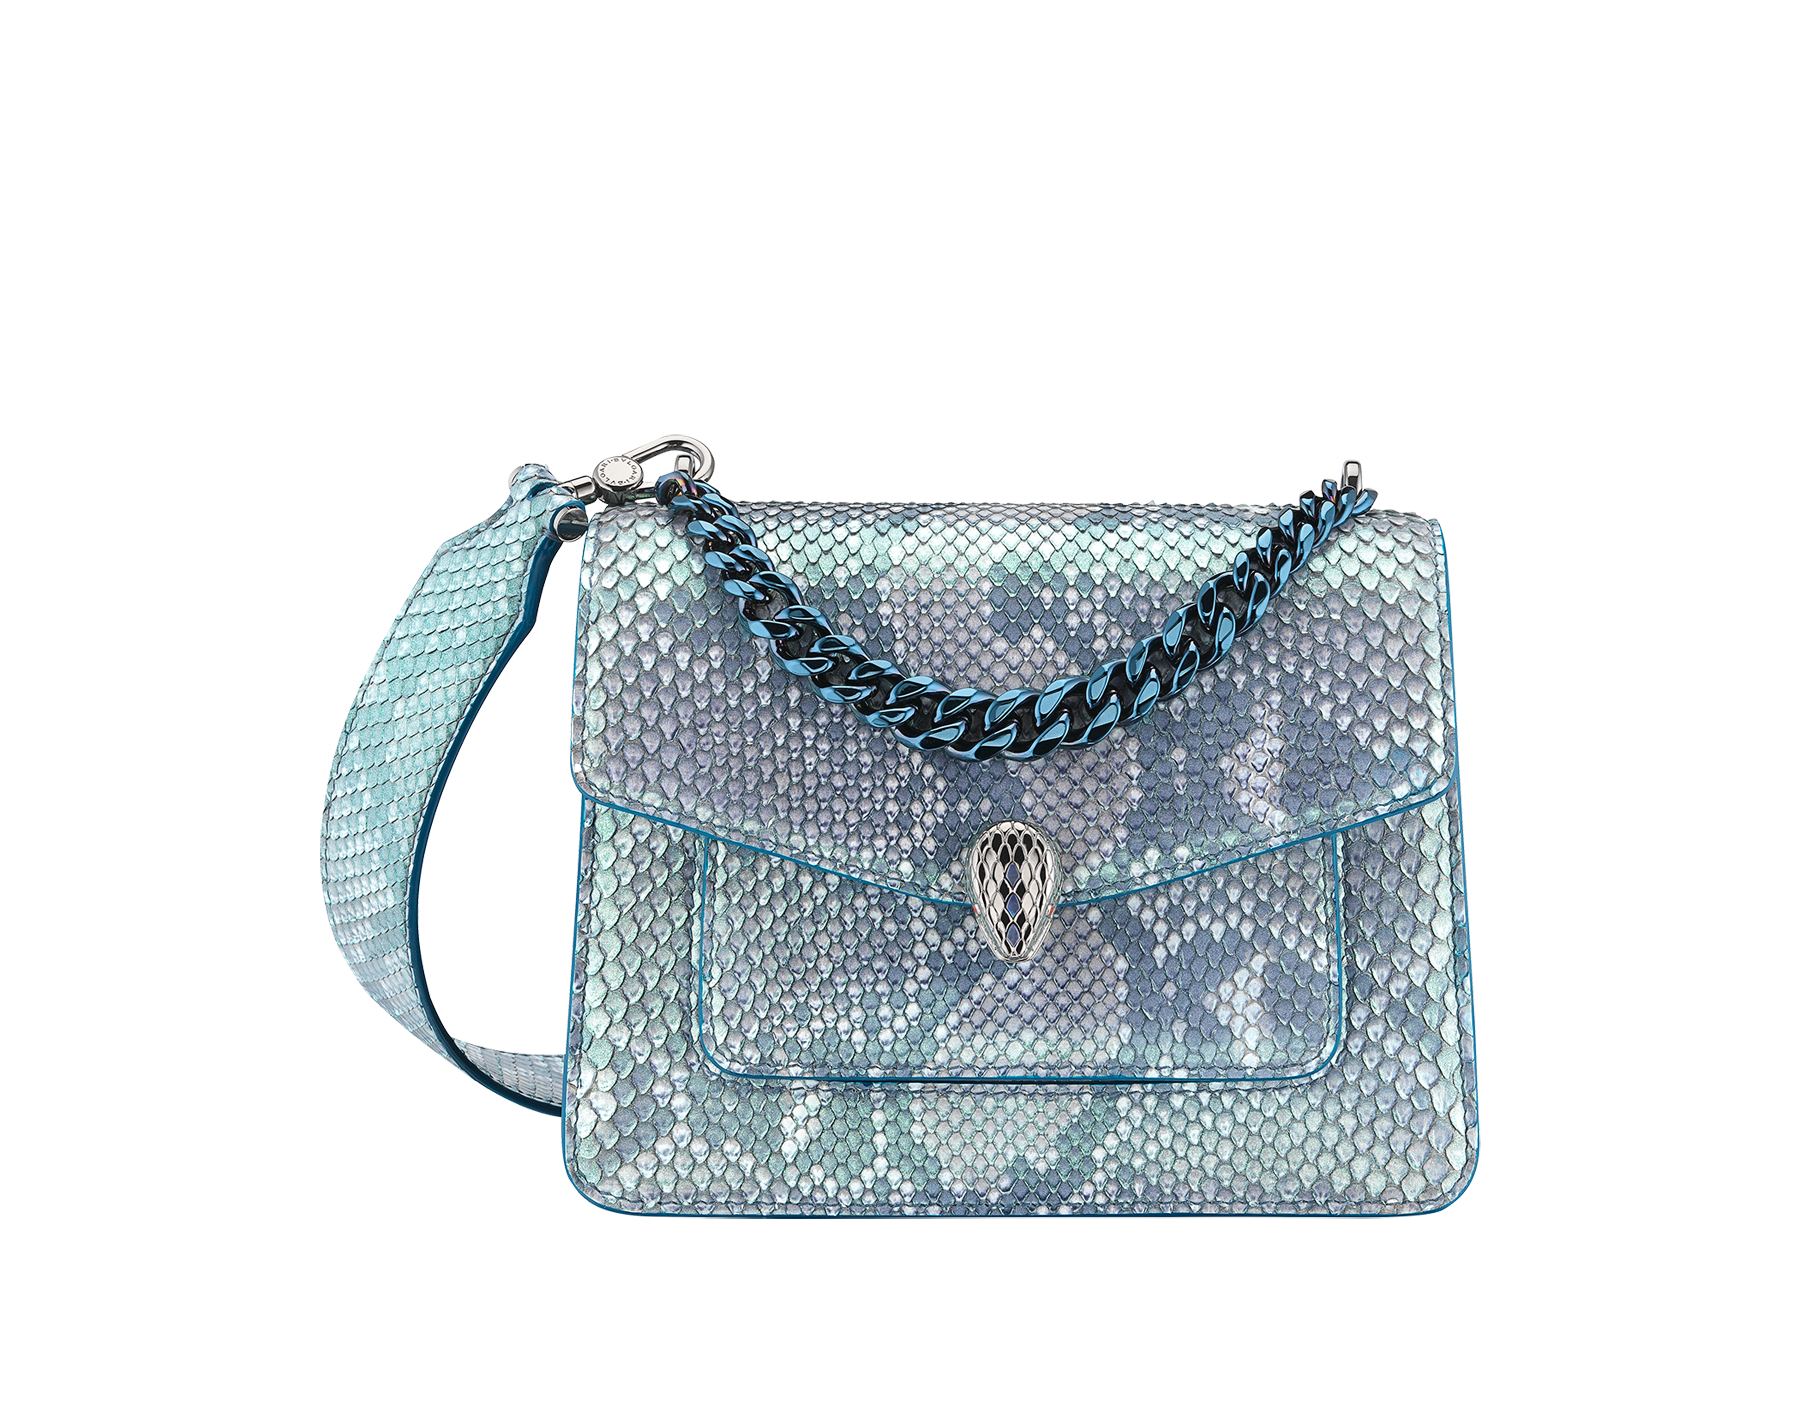 "Serpenti Forever" small maxi chain crossbody bag in Aquamarine light blue "Afterglow" python skin with a pearled effect, and an Aquamarine light blue nappa leather internal lining. New Serpenti head closure in dark ruthenium-plated brass, finished with small grey mother-of-pearl scales in the middle, and red enamel eyes. MCN-AP-A image 1